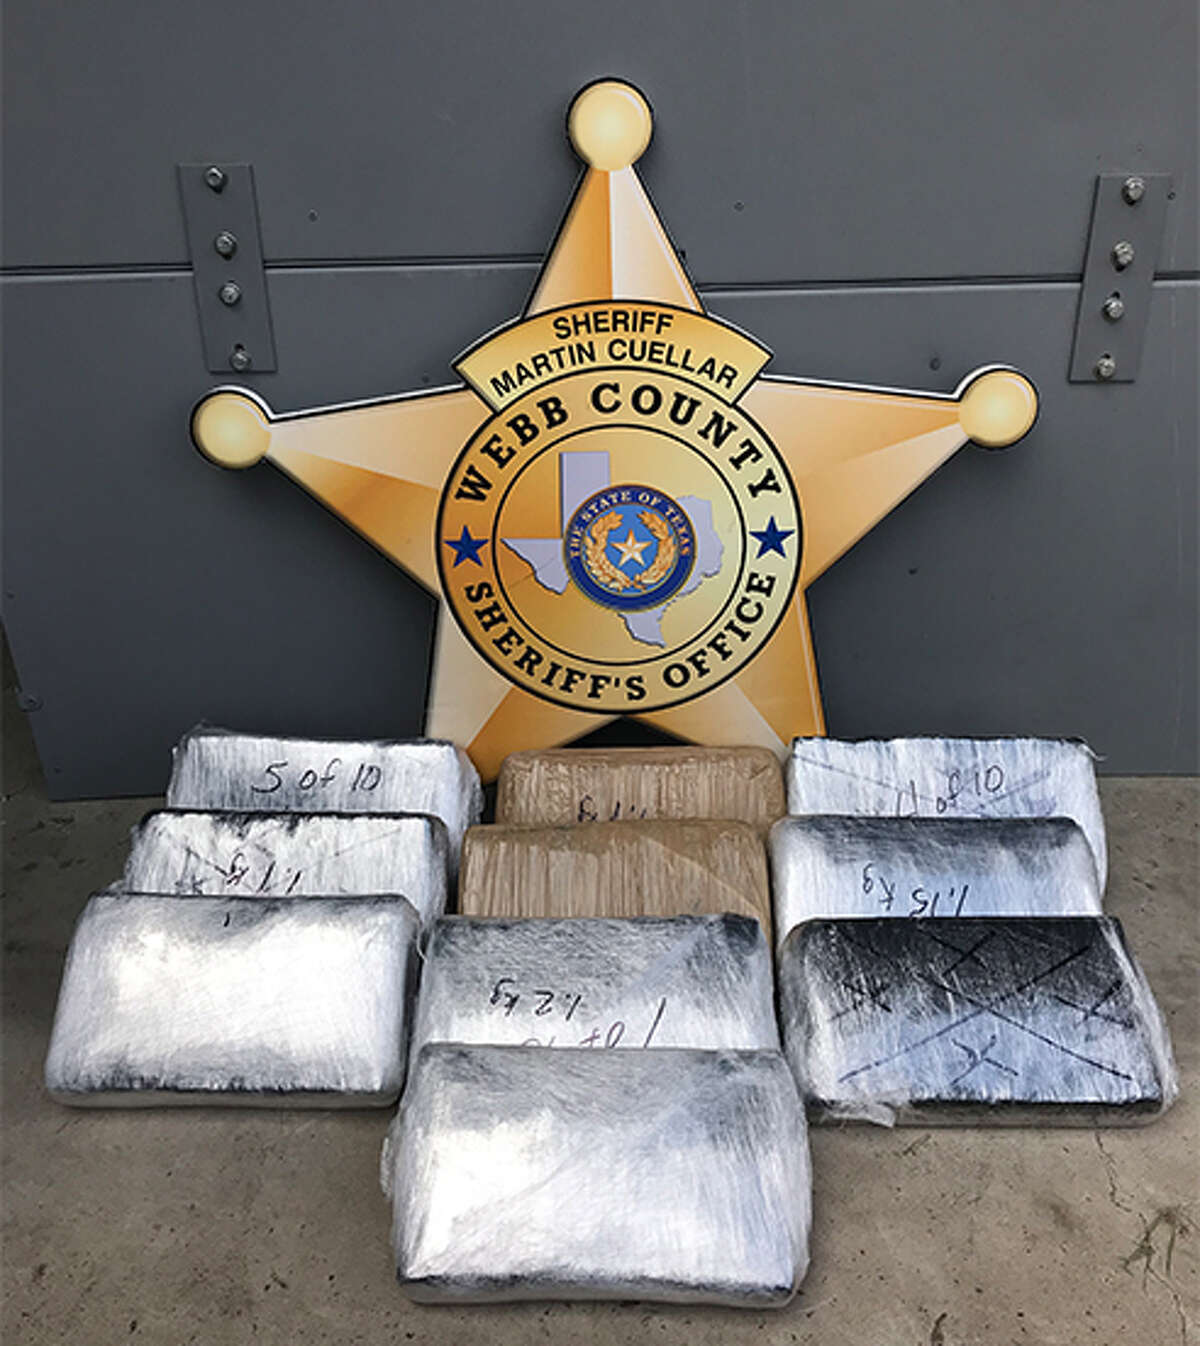 Deputies seized 10 bundles of cocaine weighing about 25 pounds from Benavides on Tuesday, the Sheriff's Office said.